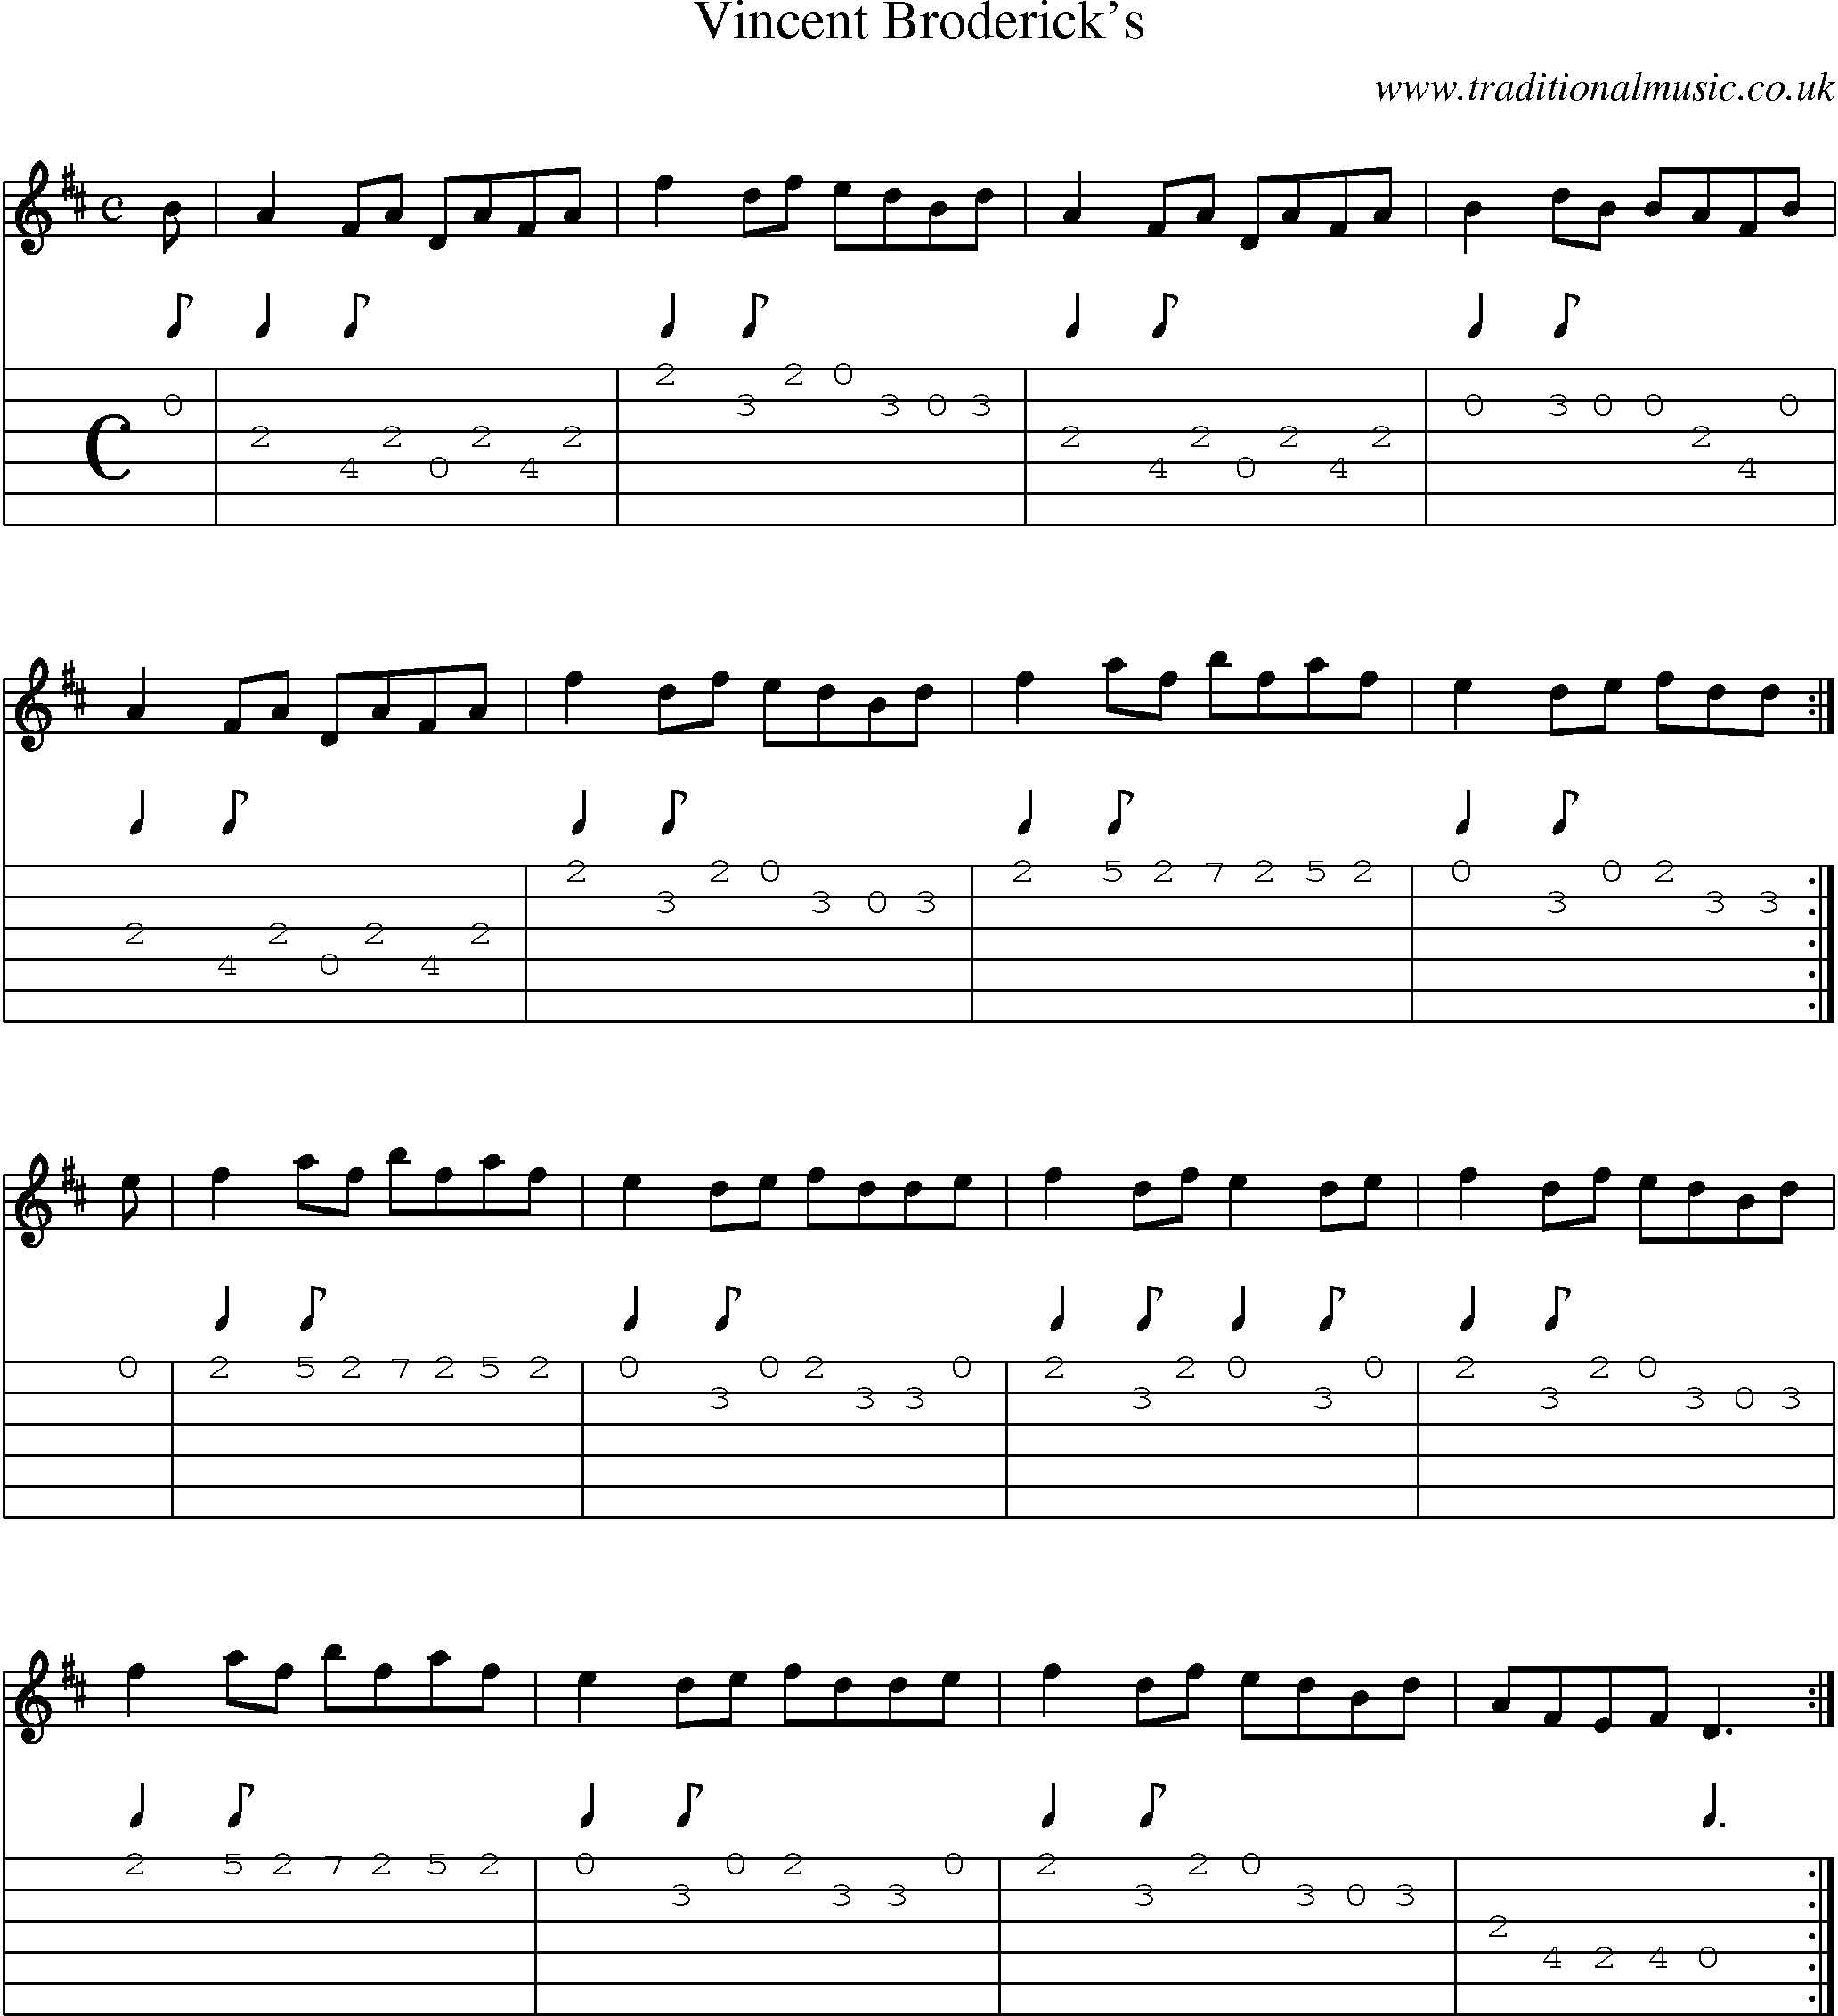 Music Score and Guitar Tabs for Vincent Brodericks